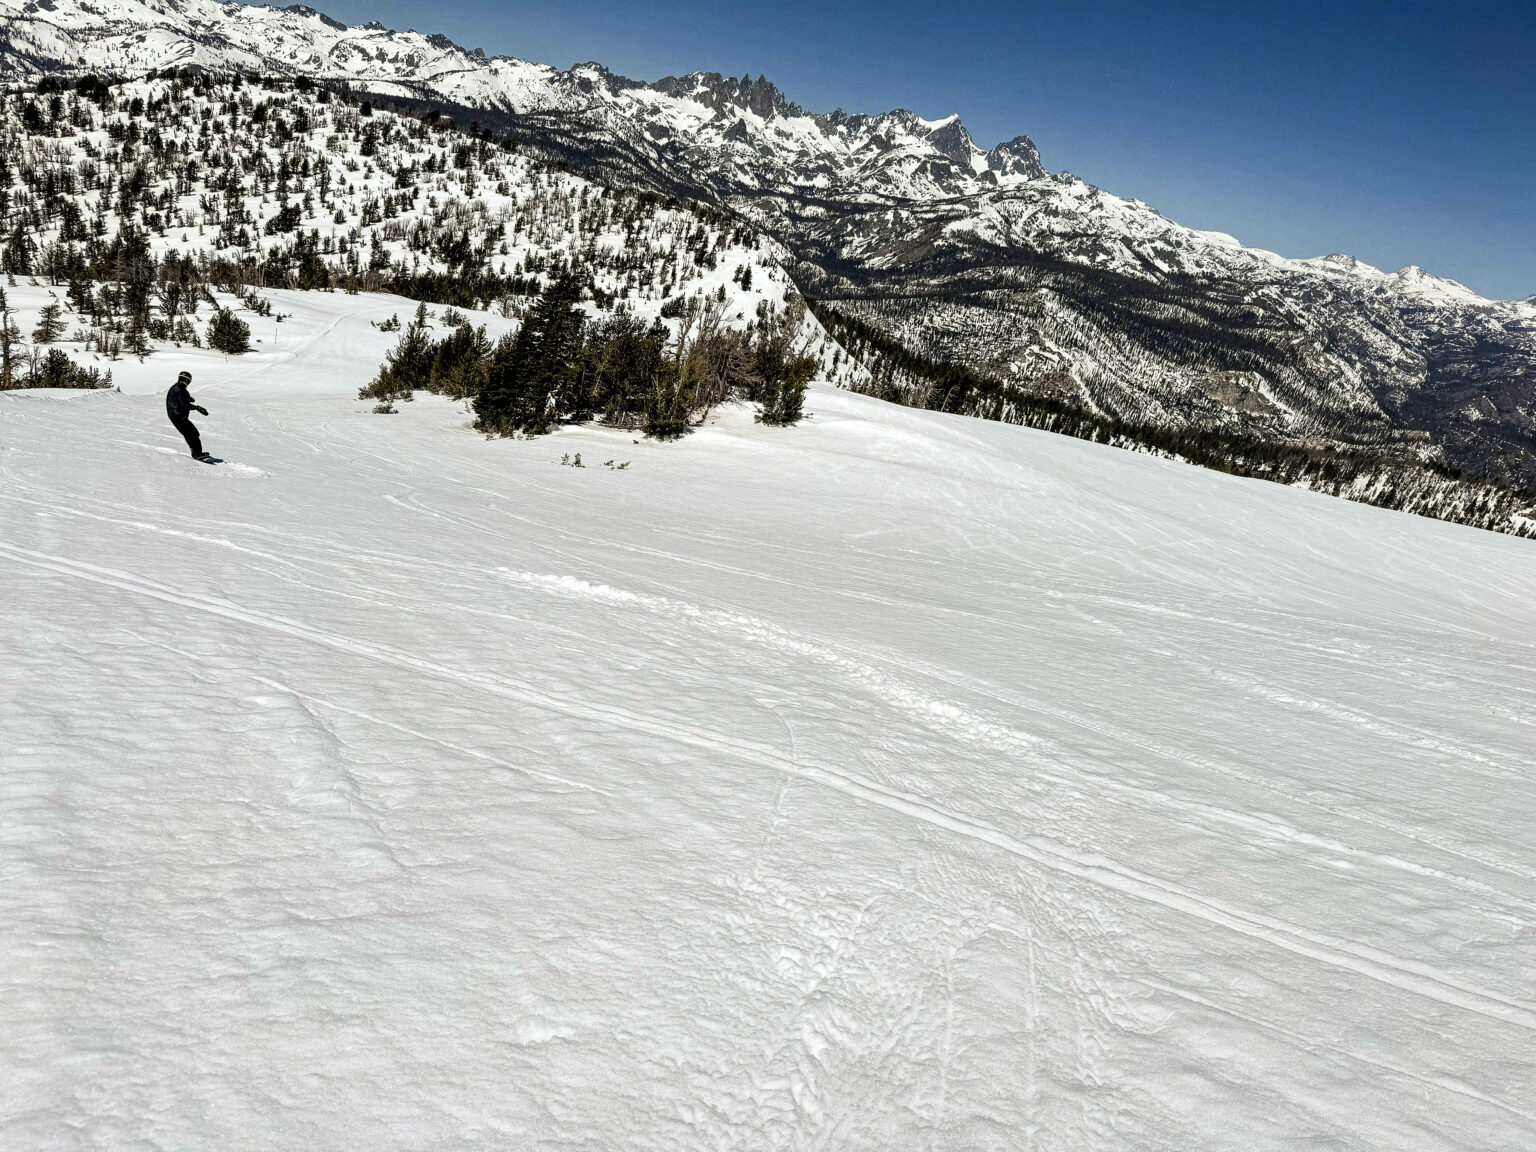 Spring Skiing on the Back Side of Mammoth Mountain